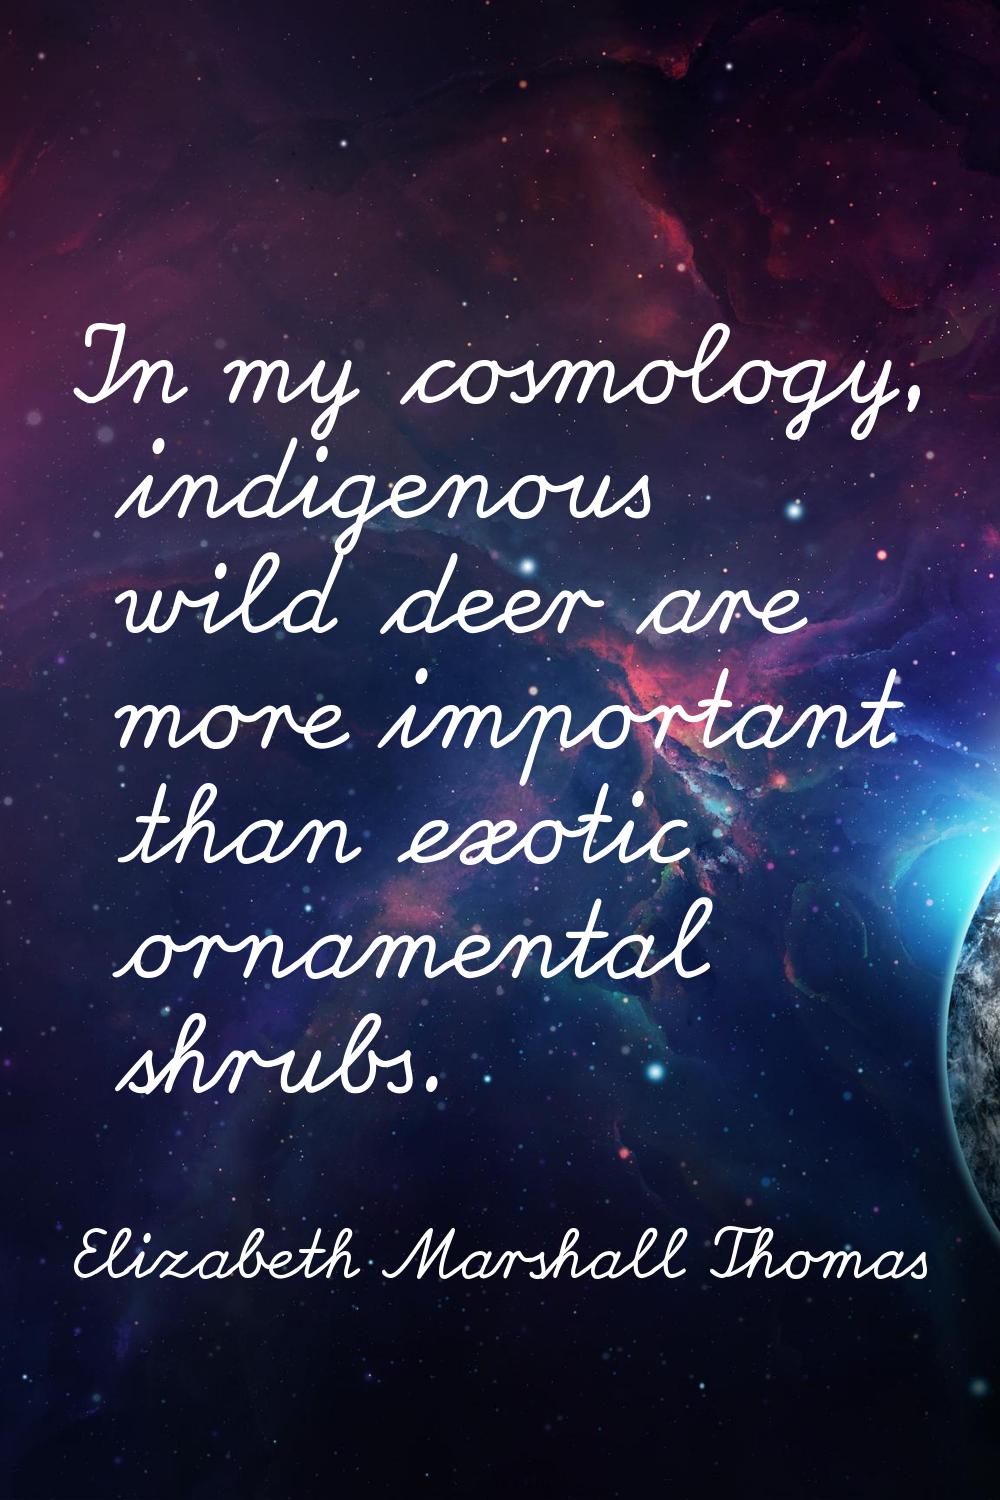 In my cosmology, indigenous wild deer are more important than exotic ornamental shrubs.